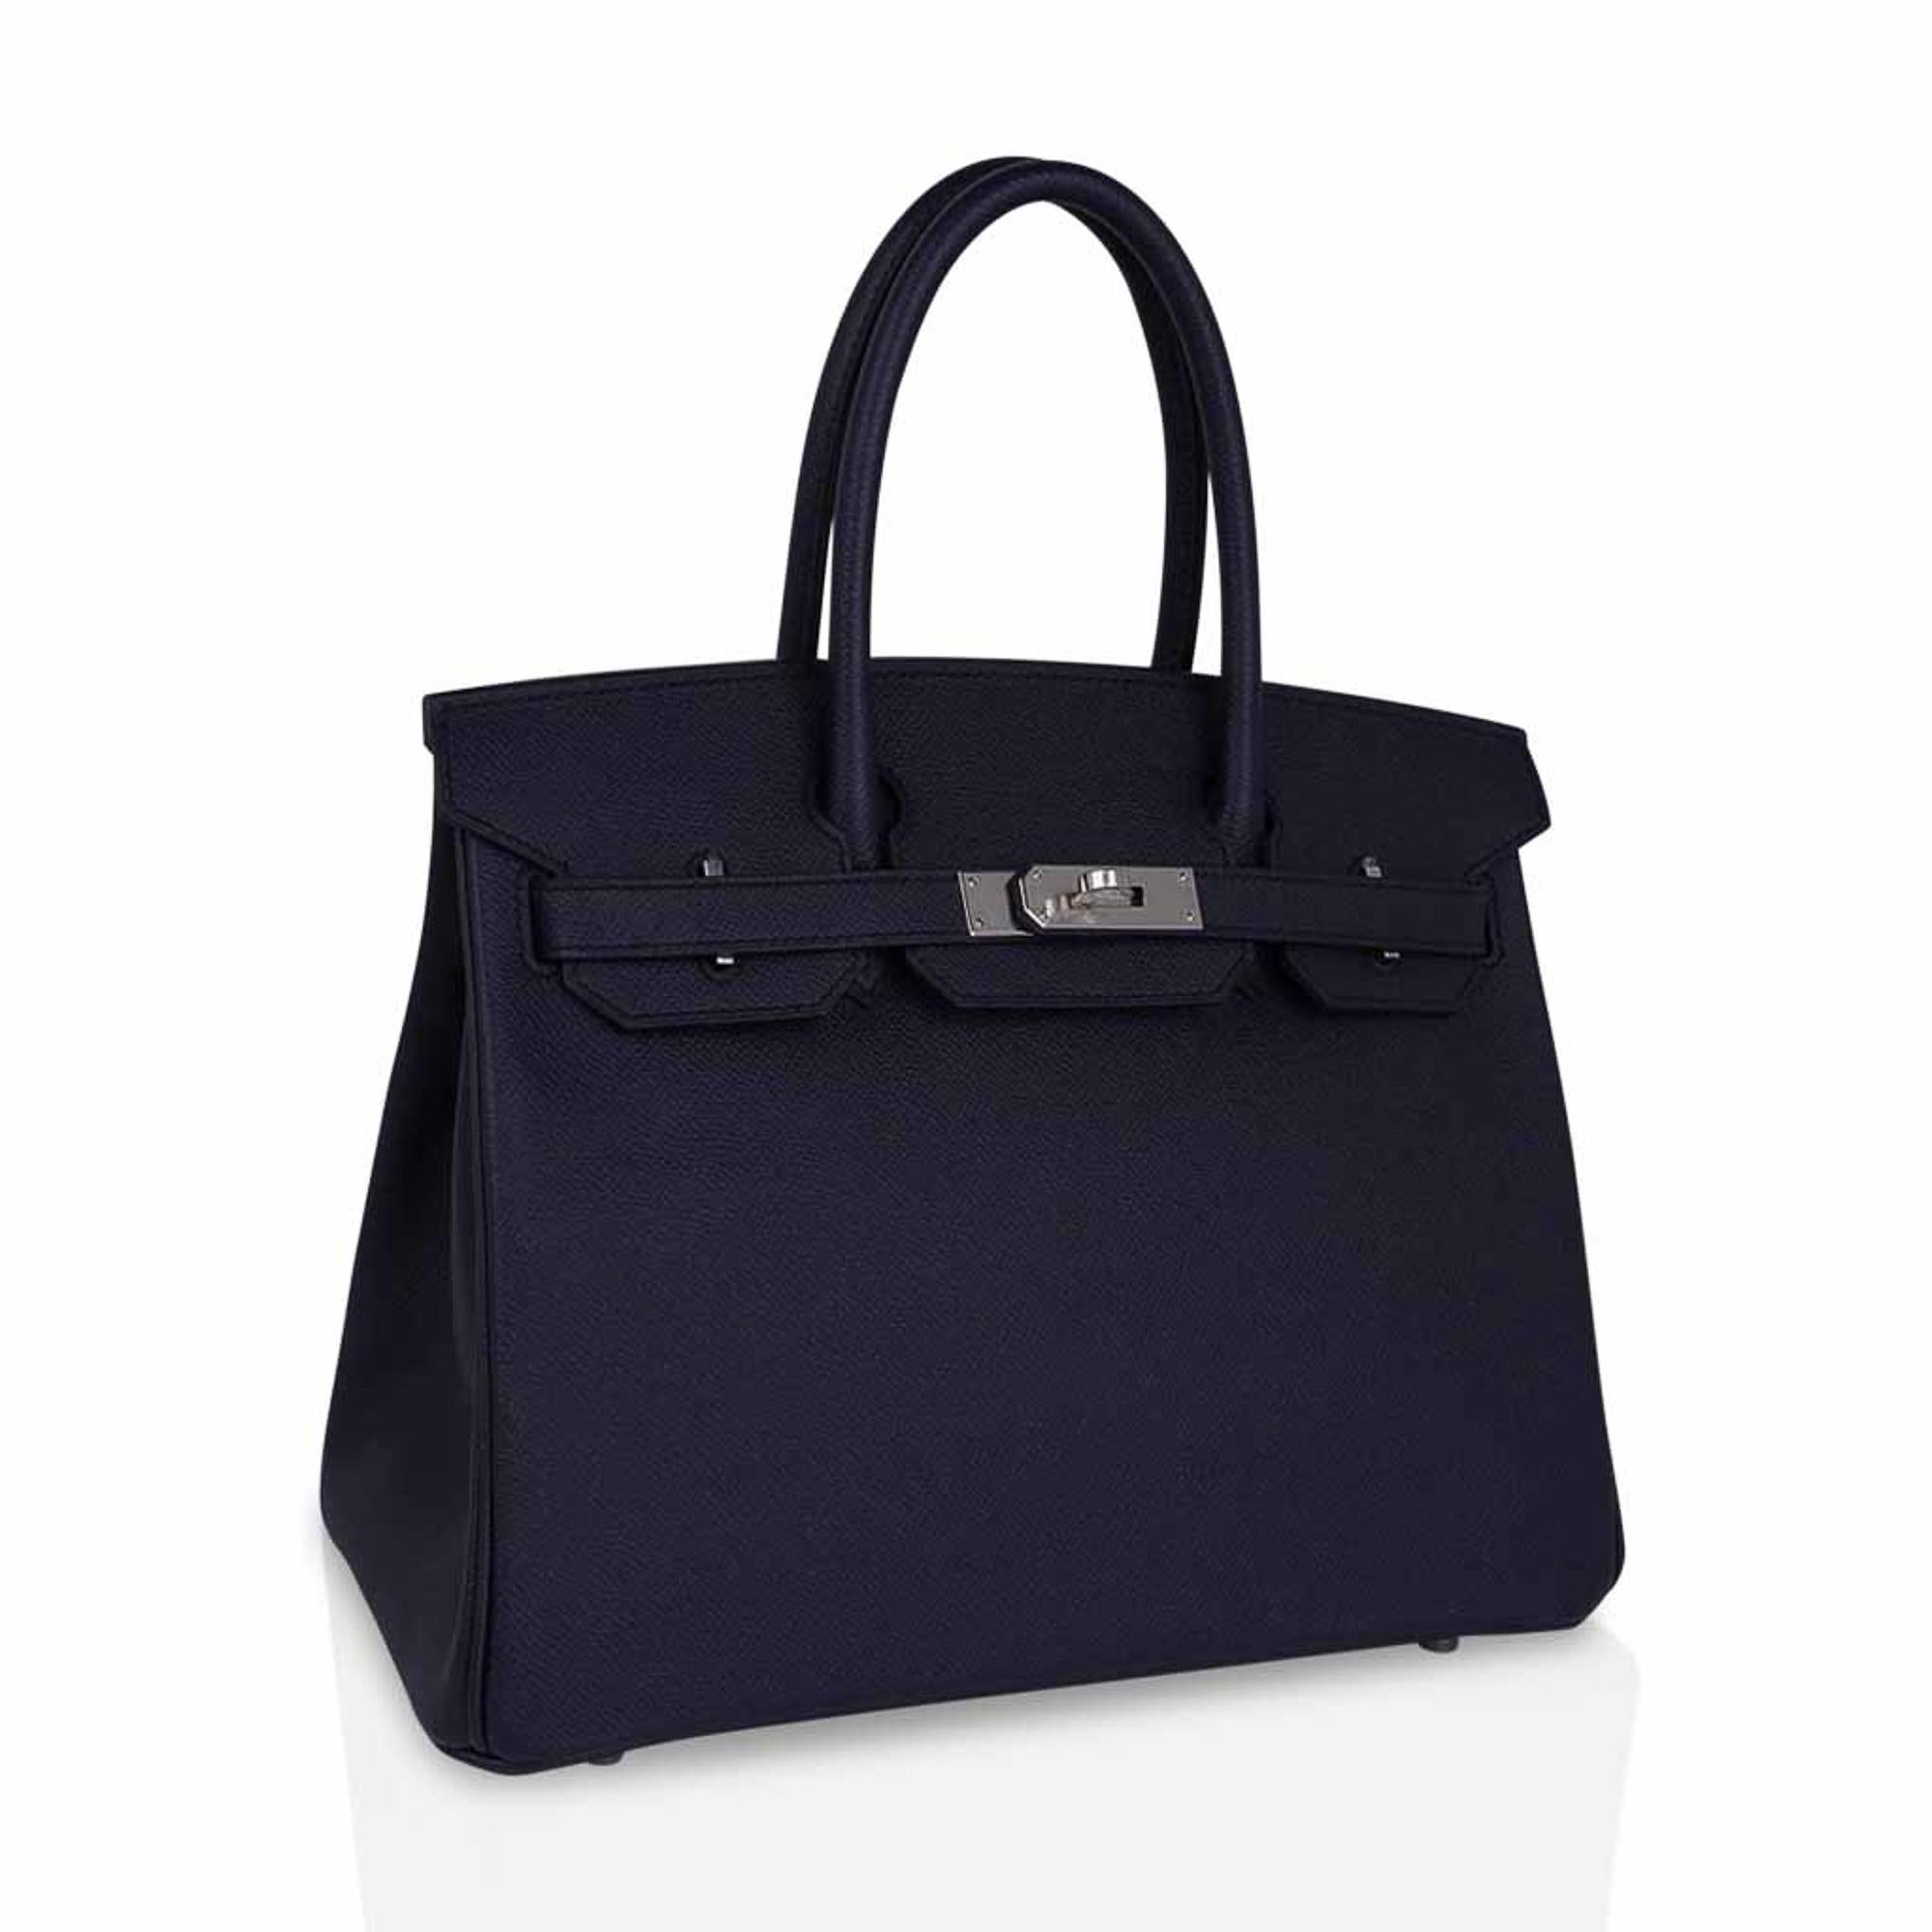 Mightychic offers a rich Hermes Birkin 30 bag featured in Bleu Indigo.
This rich deeply saturated dark blue iBirkin bag s a timeless classic.
Crisp with palladium hardware.
Classic and timeless this beautiful Hermes bag takes you from to evening in